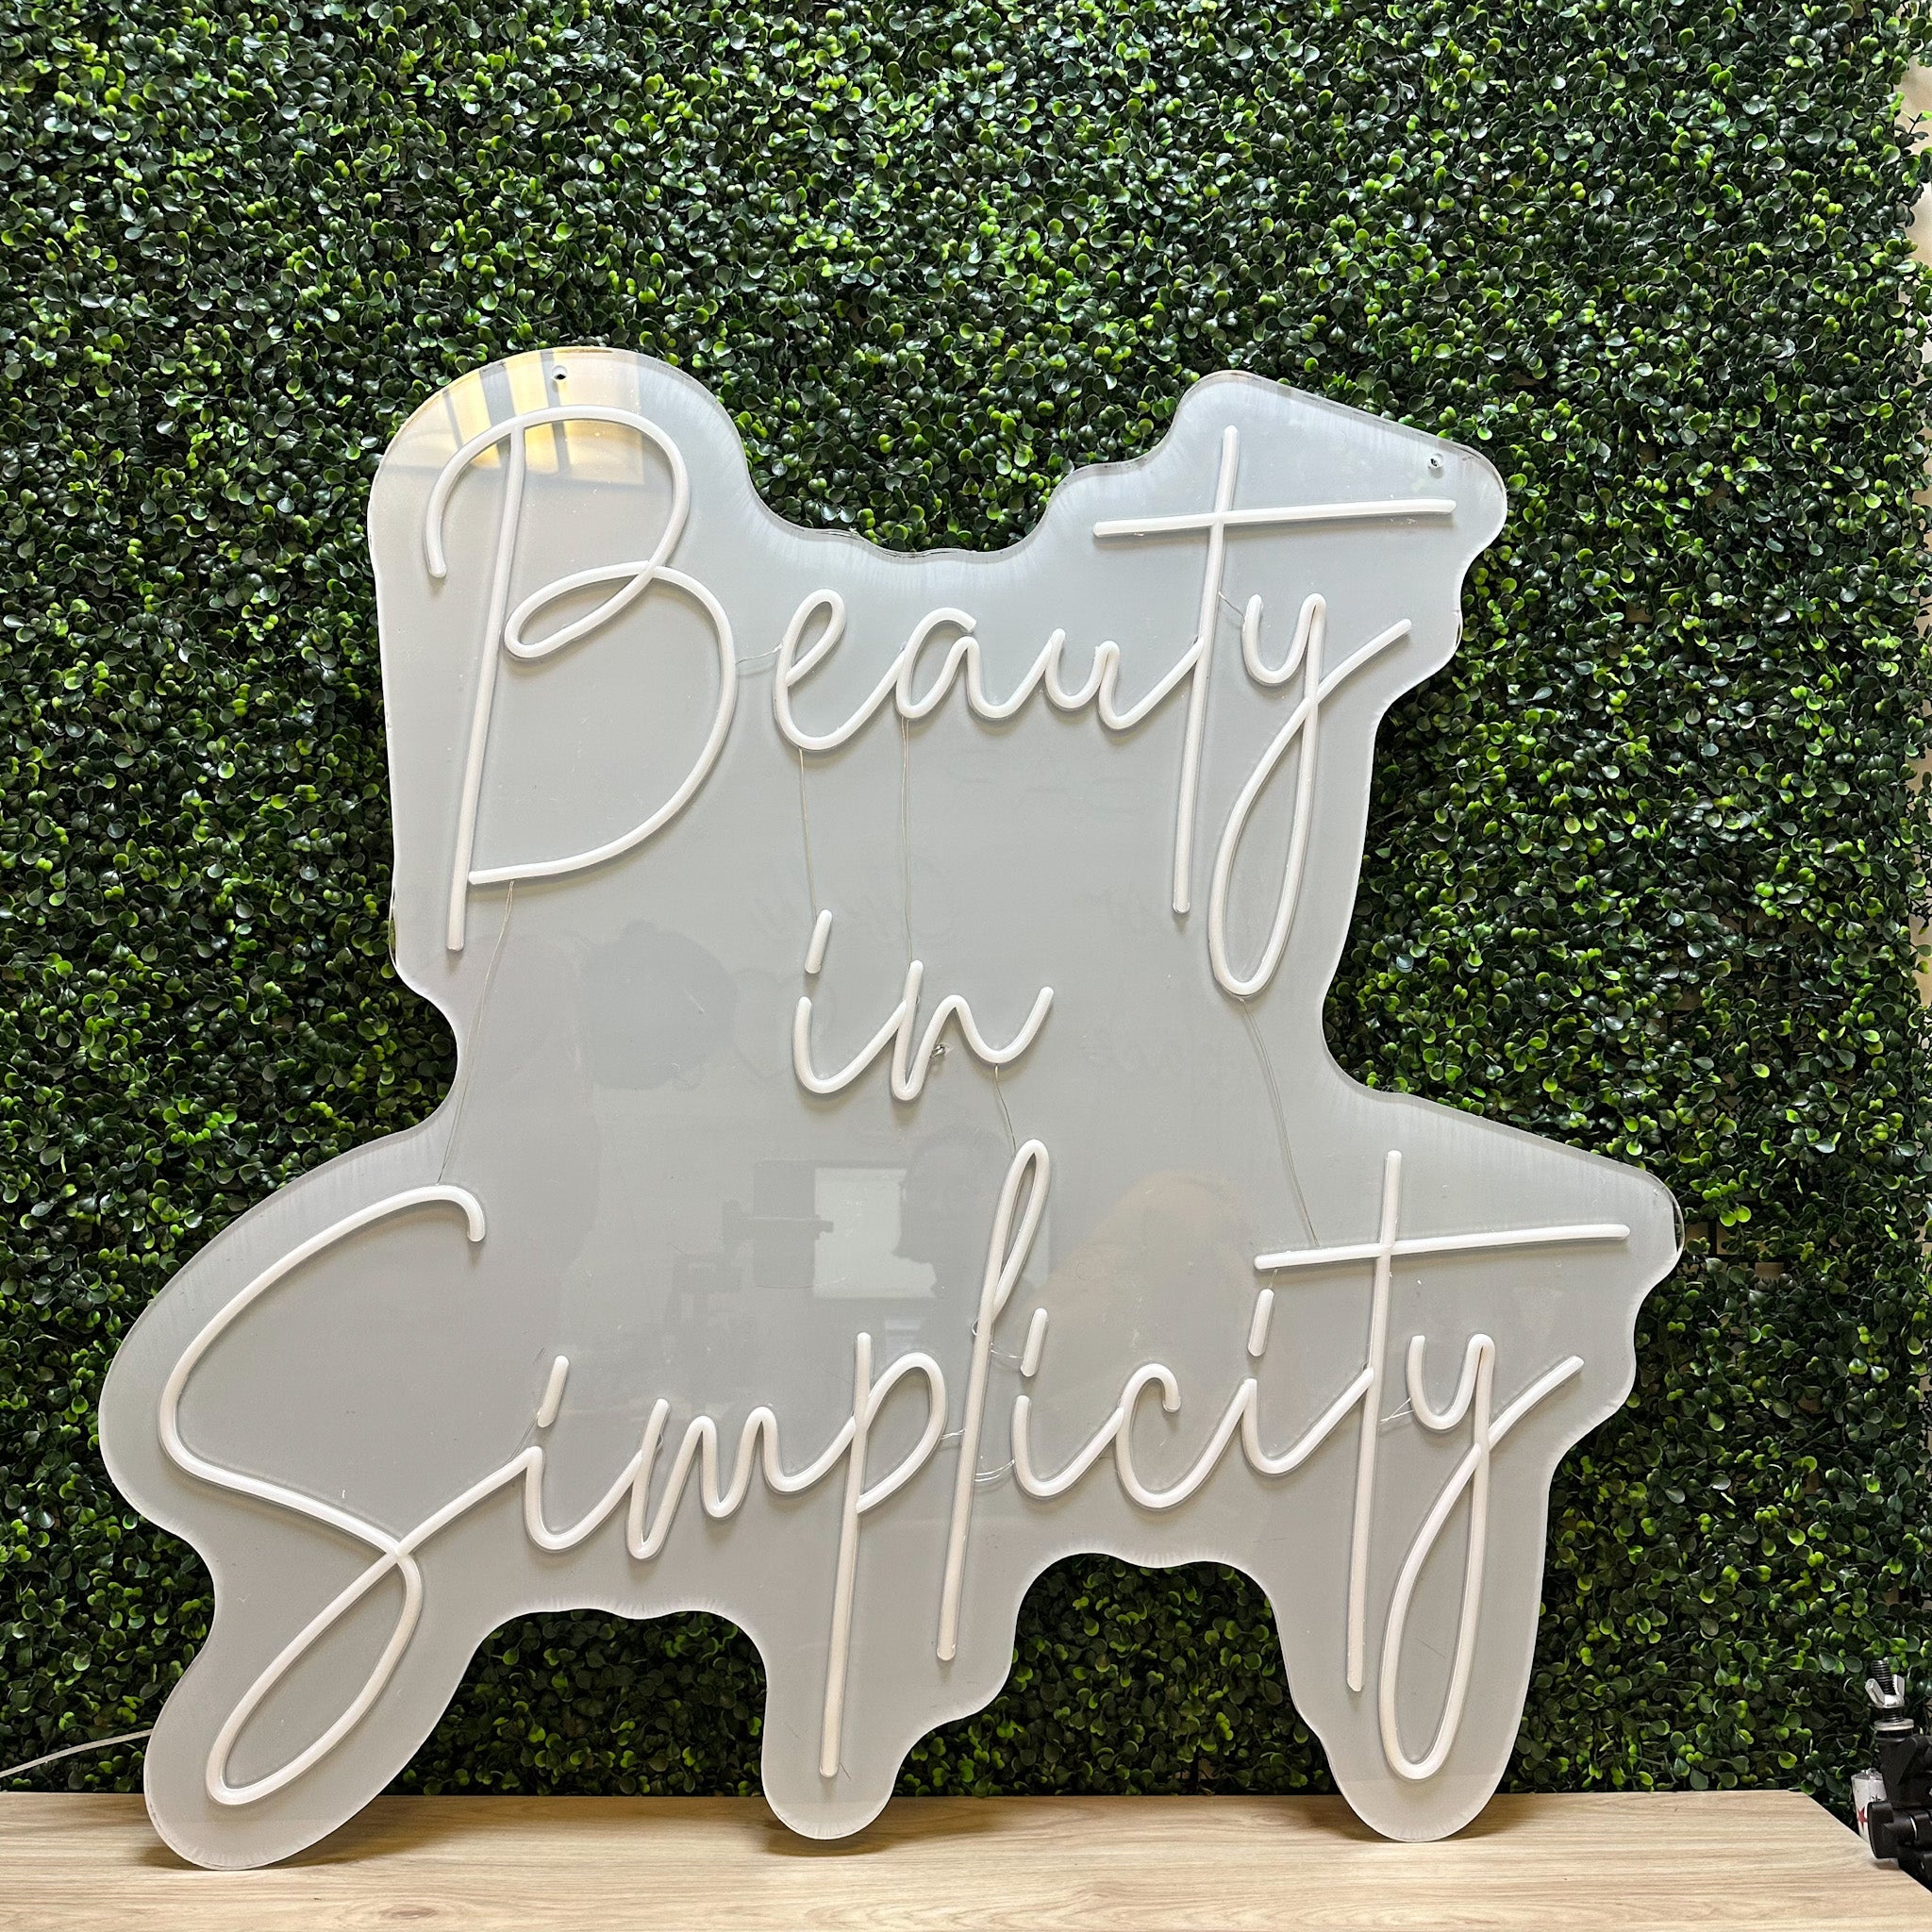 Beauty in Simplicity RS LED Neon Sign - Made In London